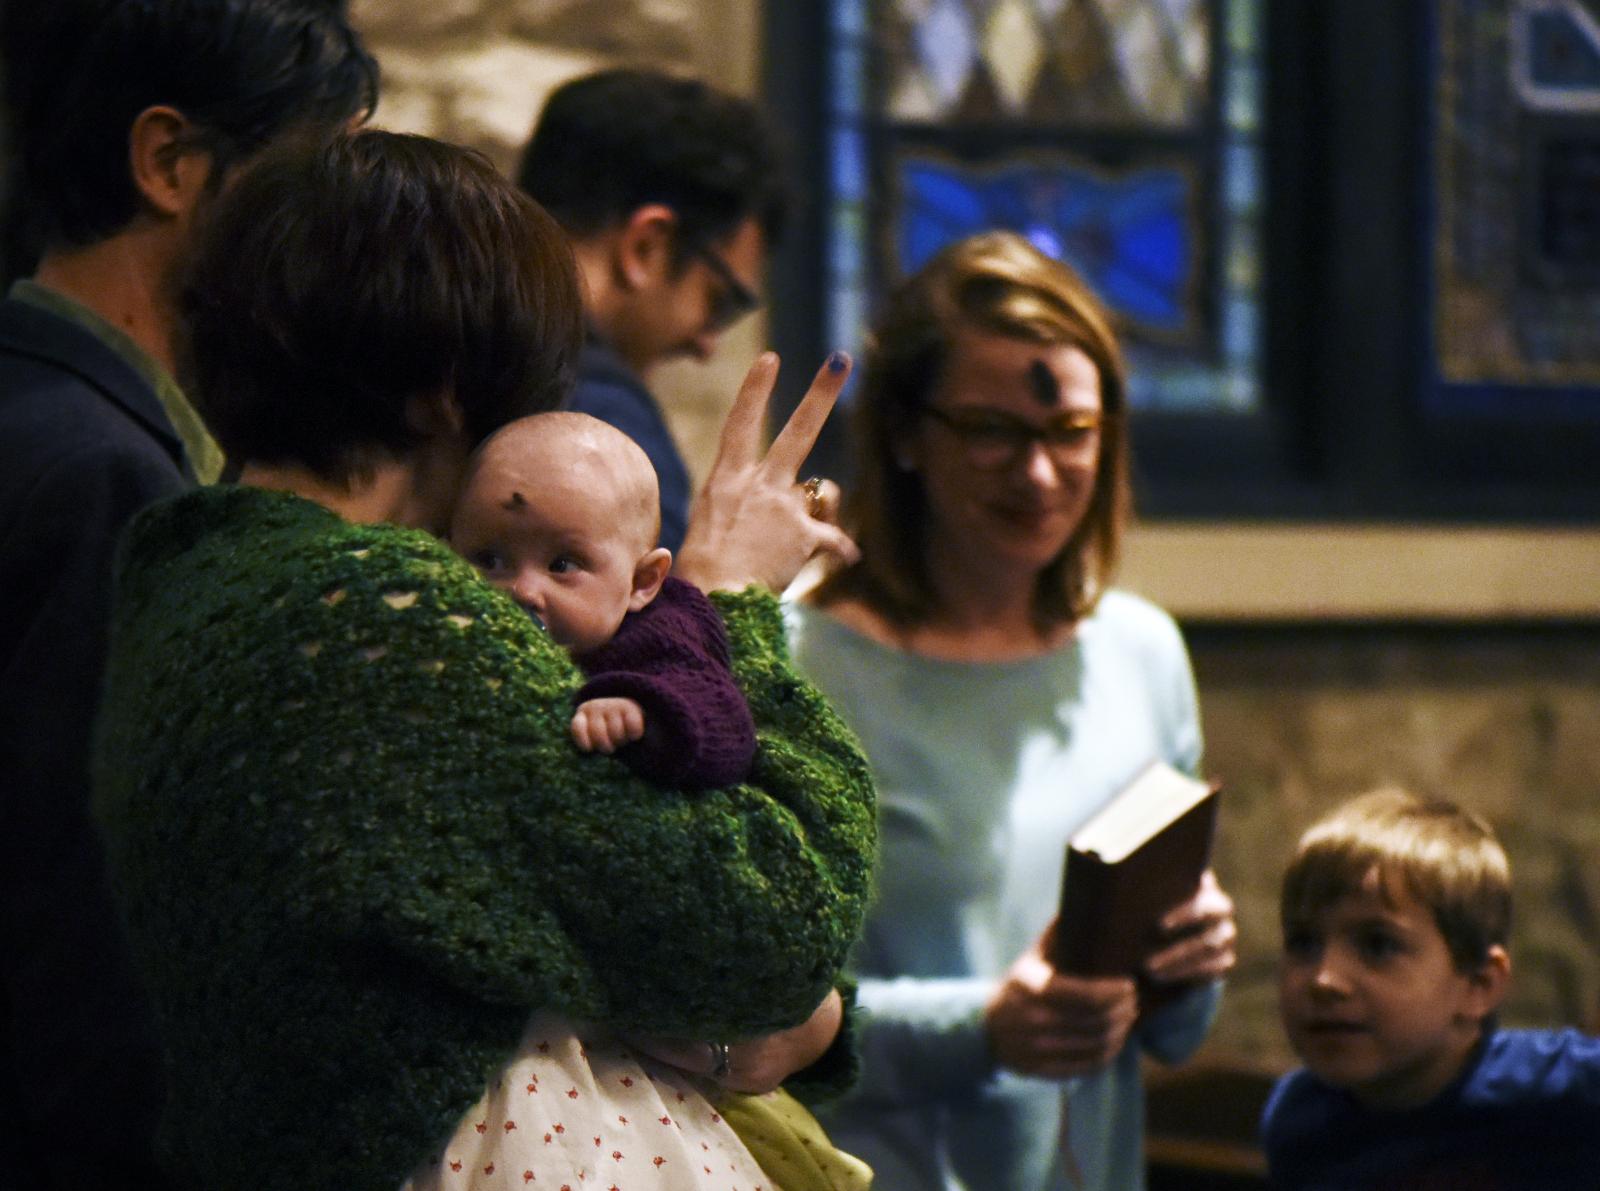 Morgan Owen passes the peace to other members of the congregation while holding her daughter, Hollis Owen, during the Ash Wednesday service on February 26, 2020, at Calvary Episcopal Church in Columbia, Missouri. Ash Wednesday signifies the beginning of Lent for some Christian denominations.